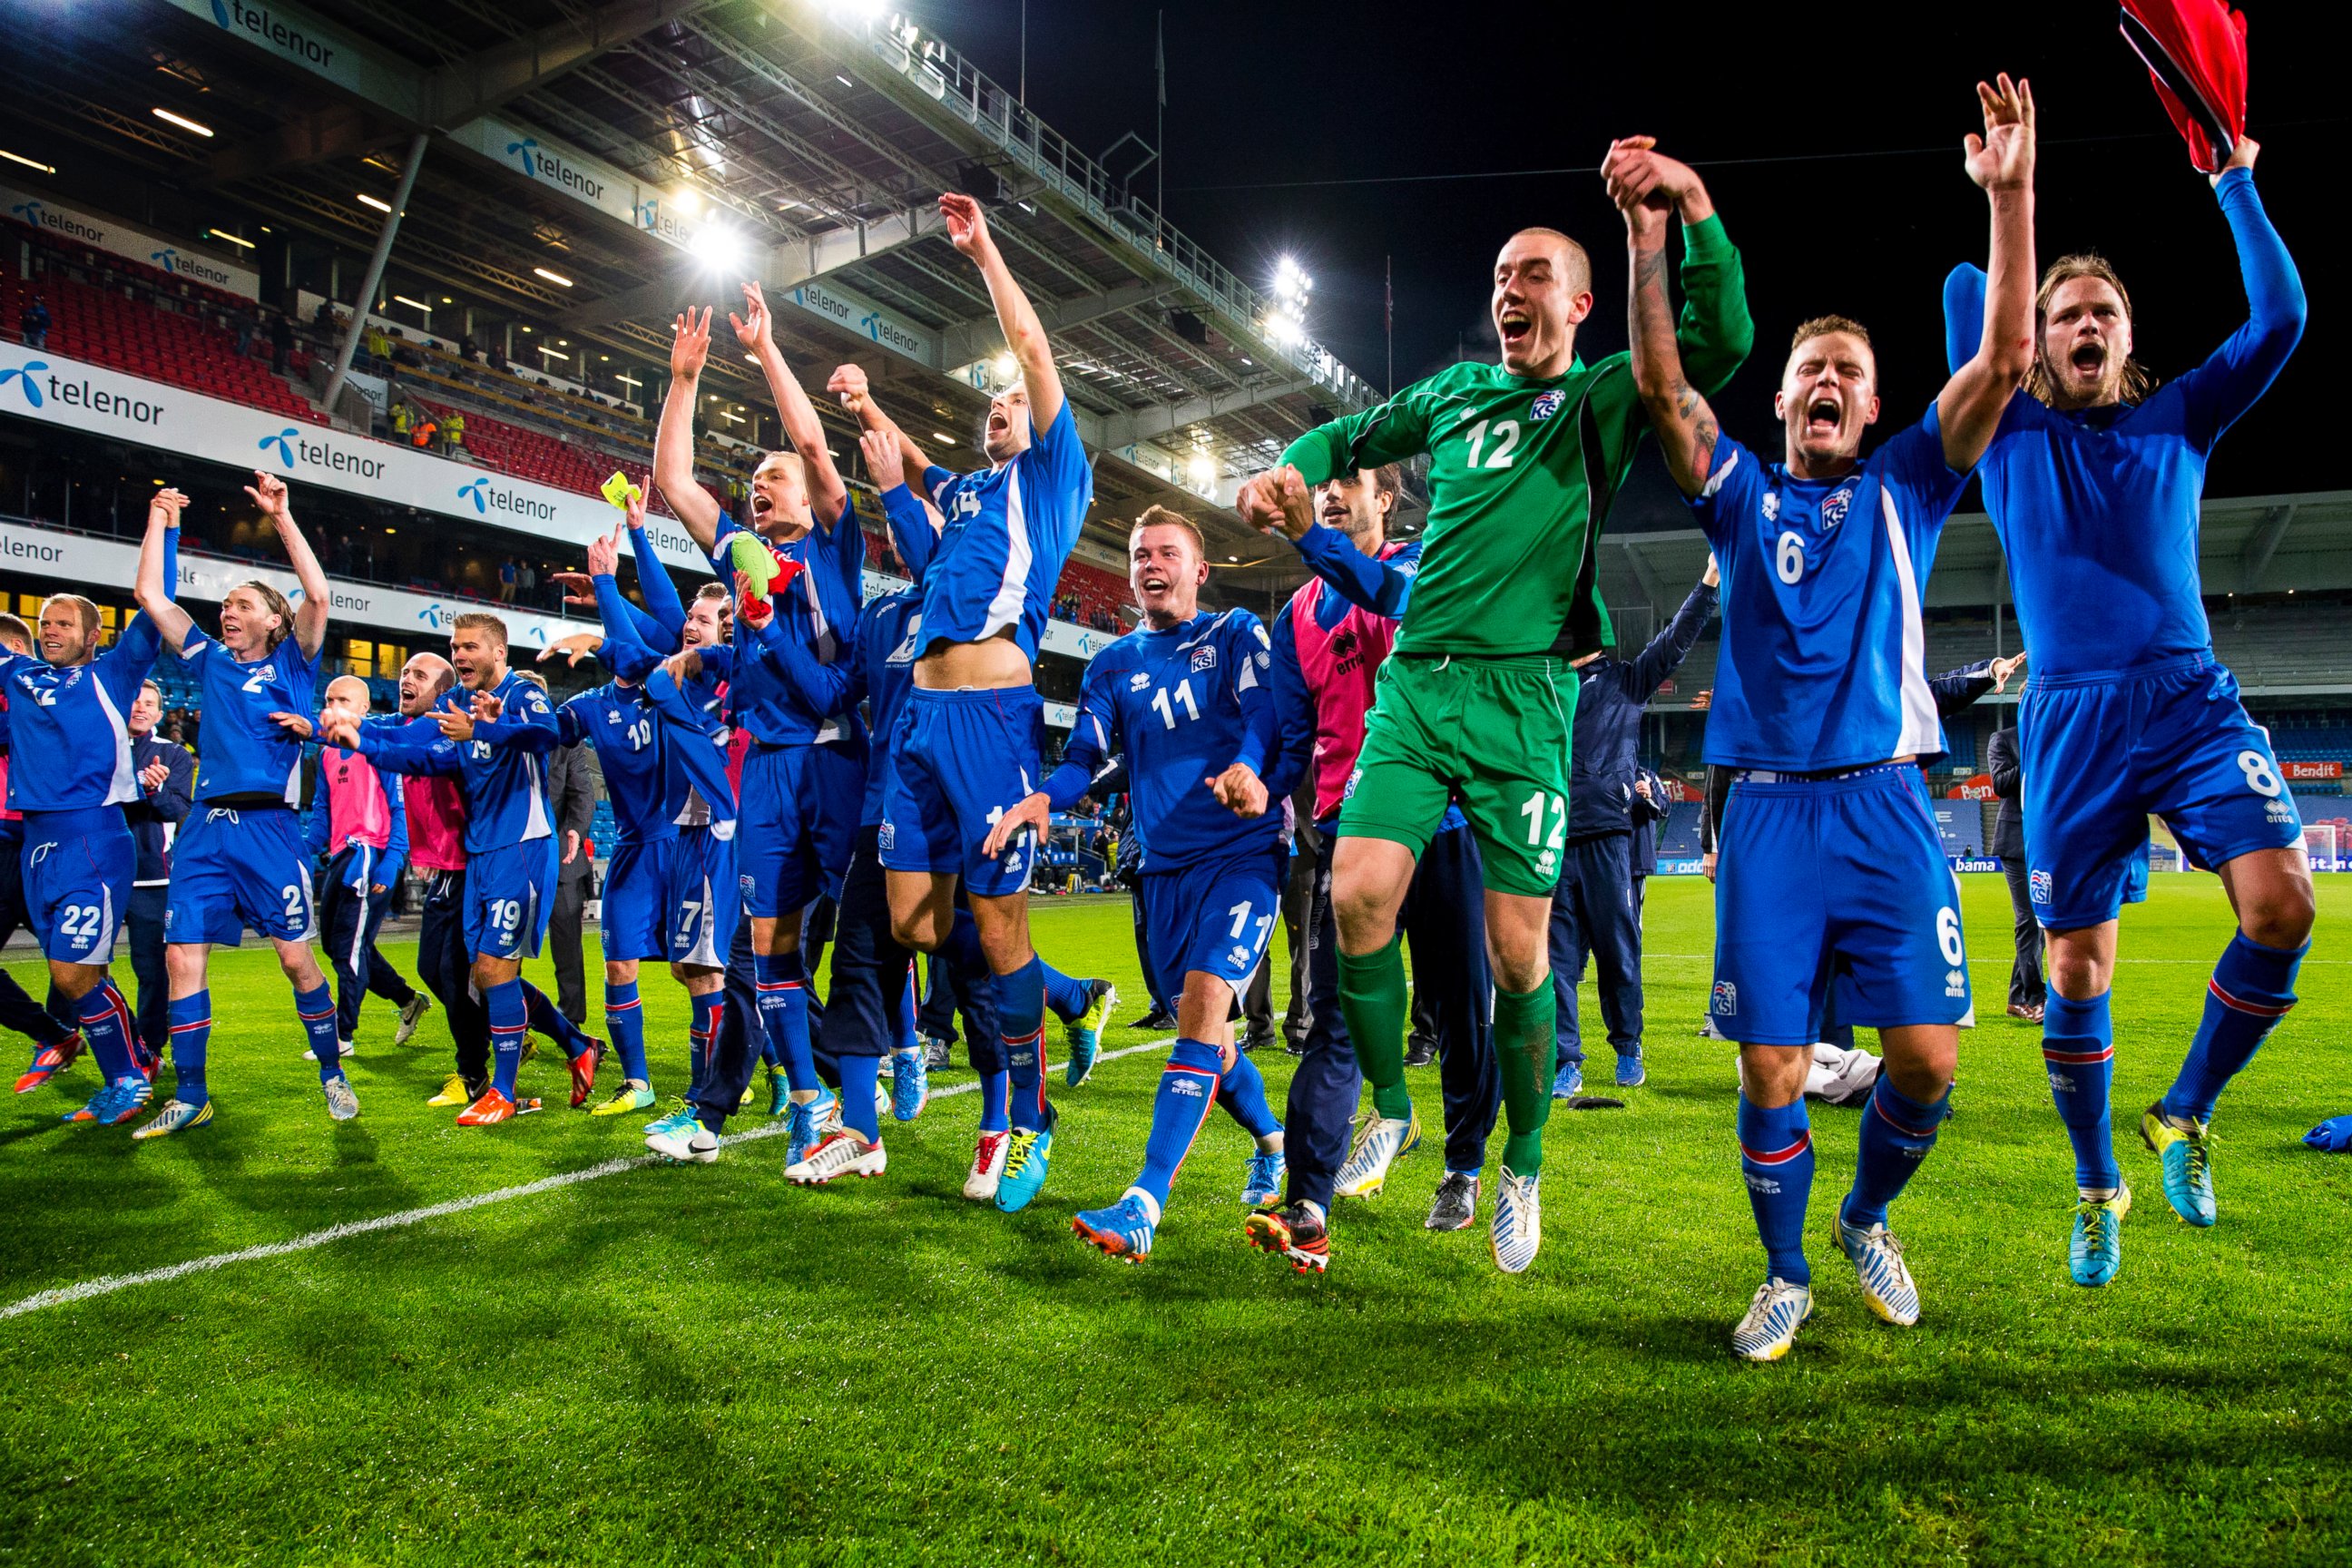 PHOTO: Icelands team celebrates after the FIFA World Cup 2014 group E qualifying football match between Norway and Iceland in Oslo, Norway, October 15, 2013.